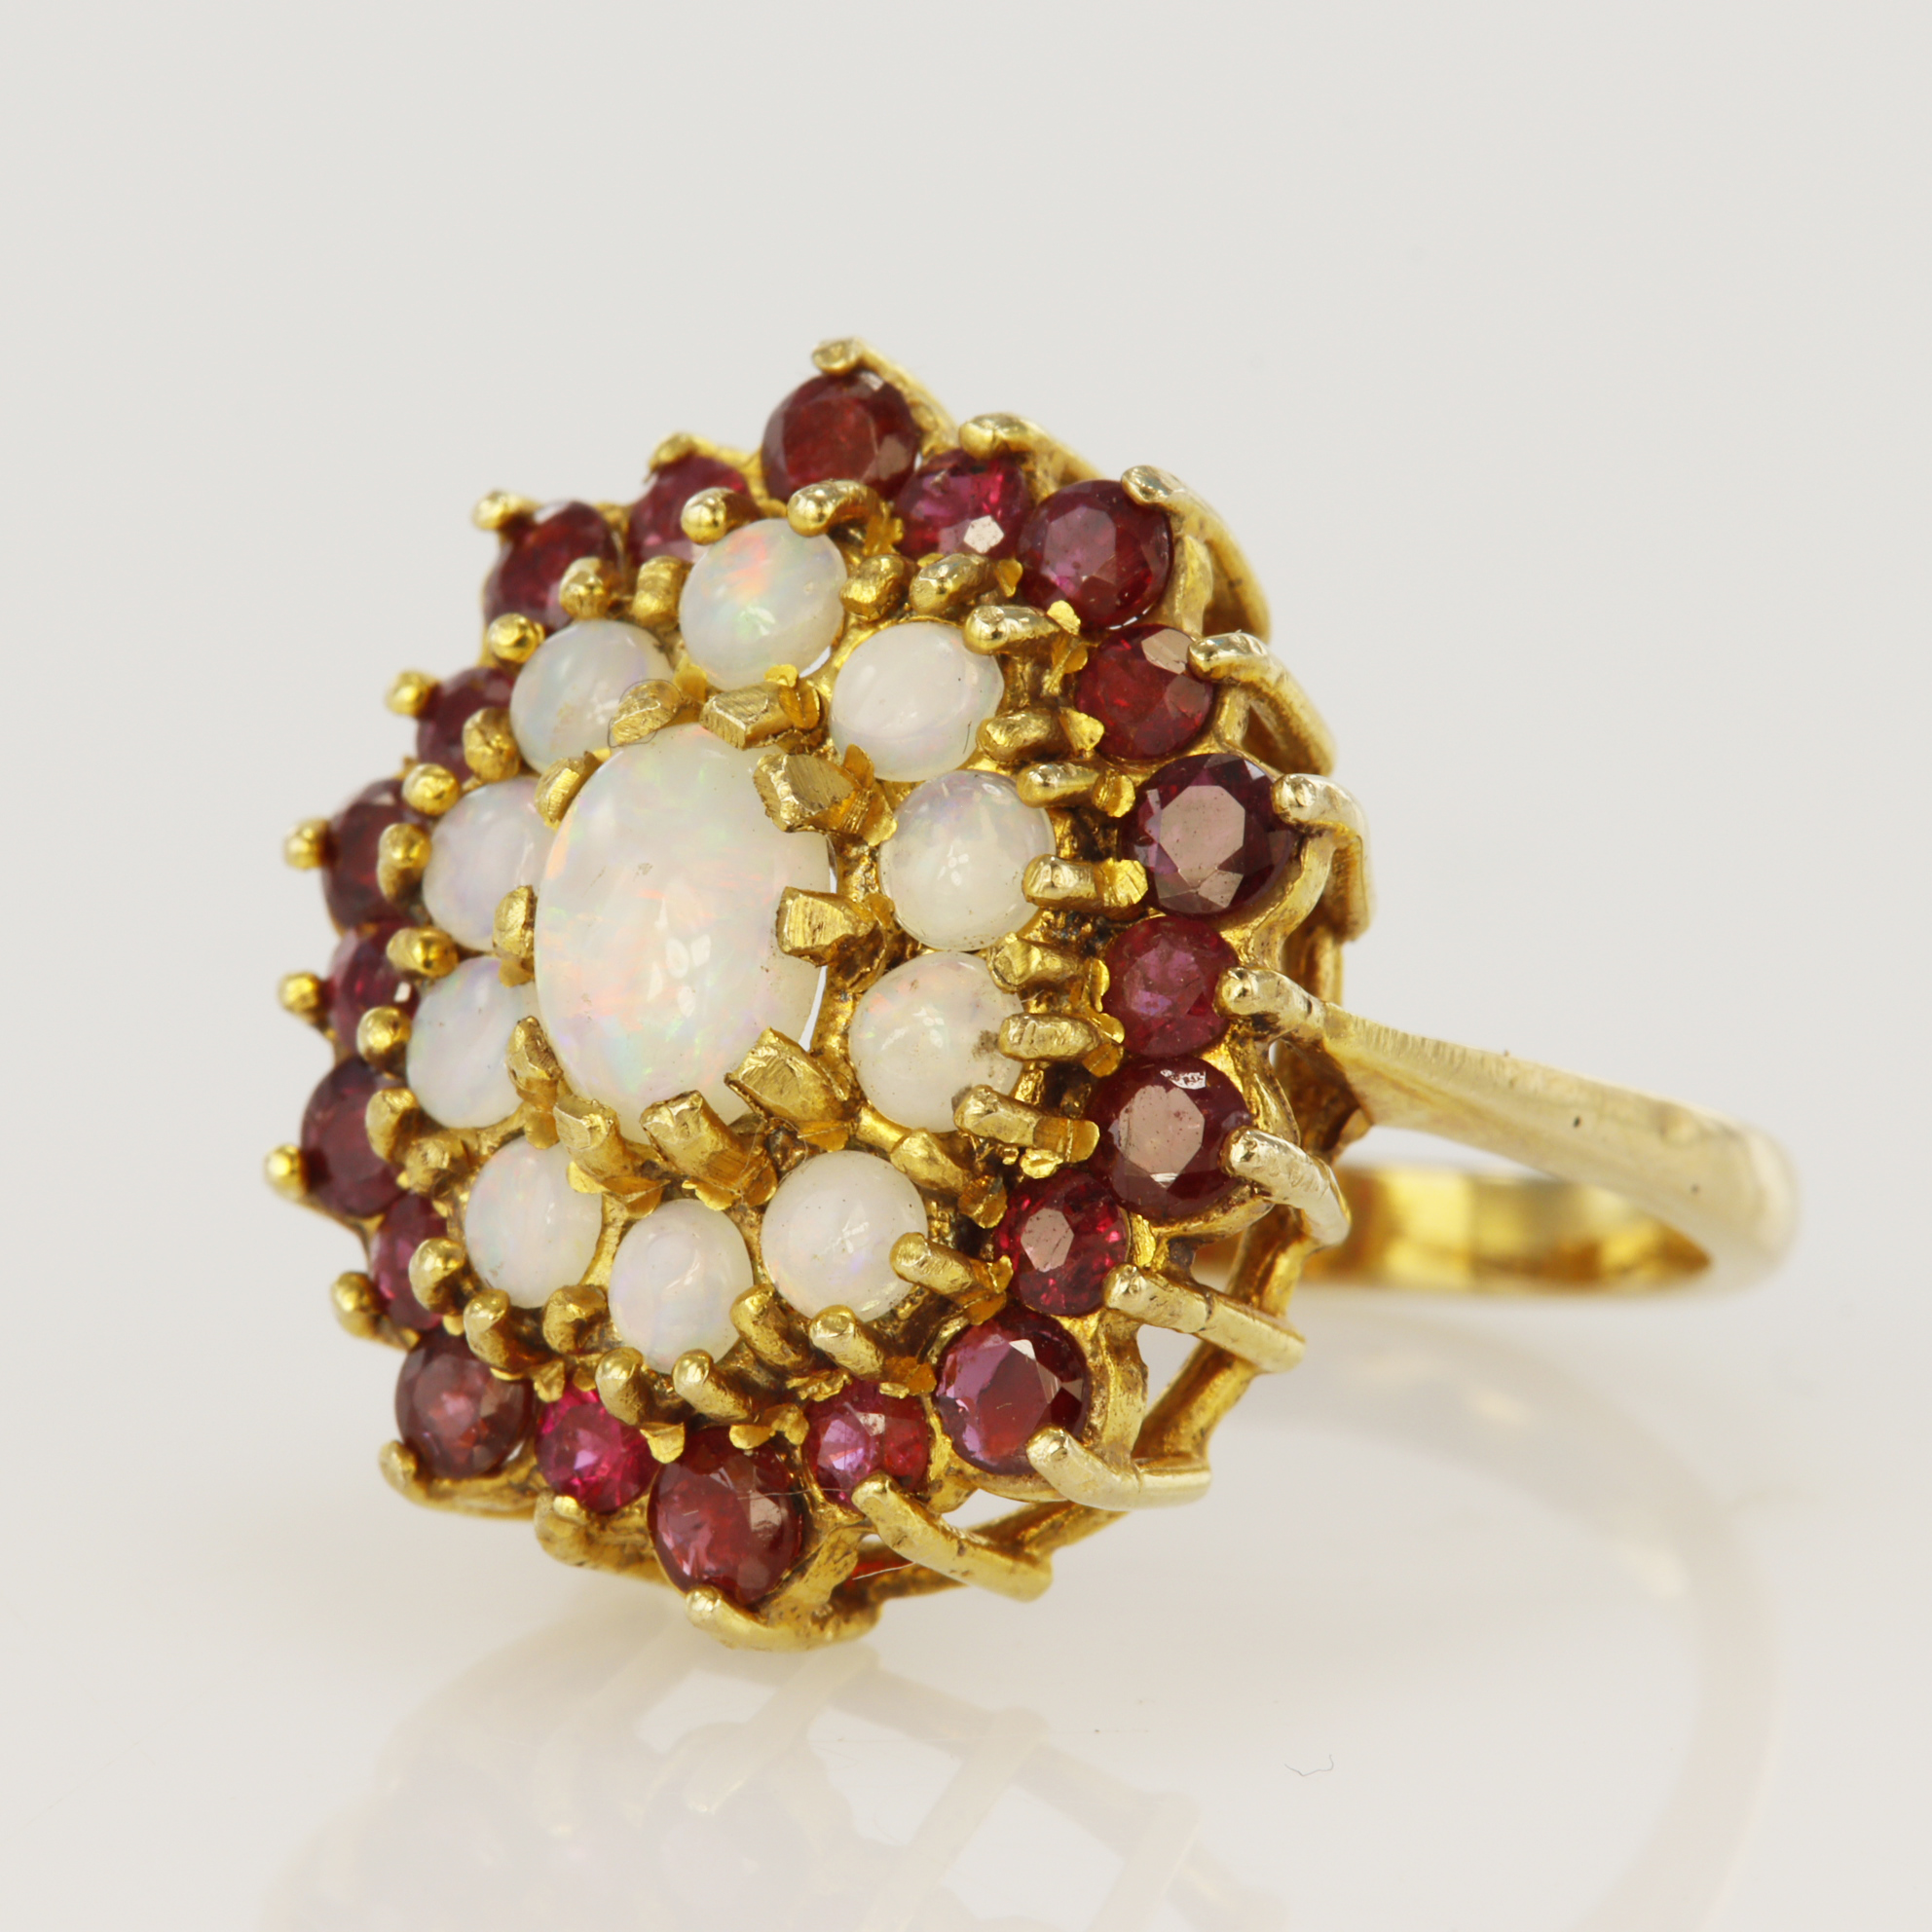 9ct yellow gold ruby and opal cluster dress ring, principle oval opal measures 7 x 5mm, surrounded